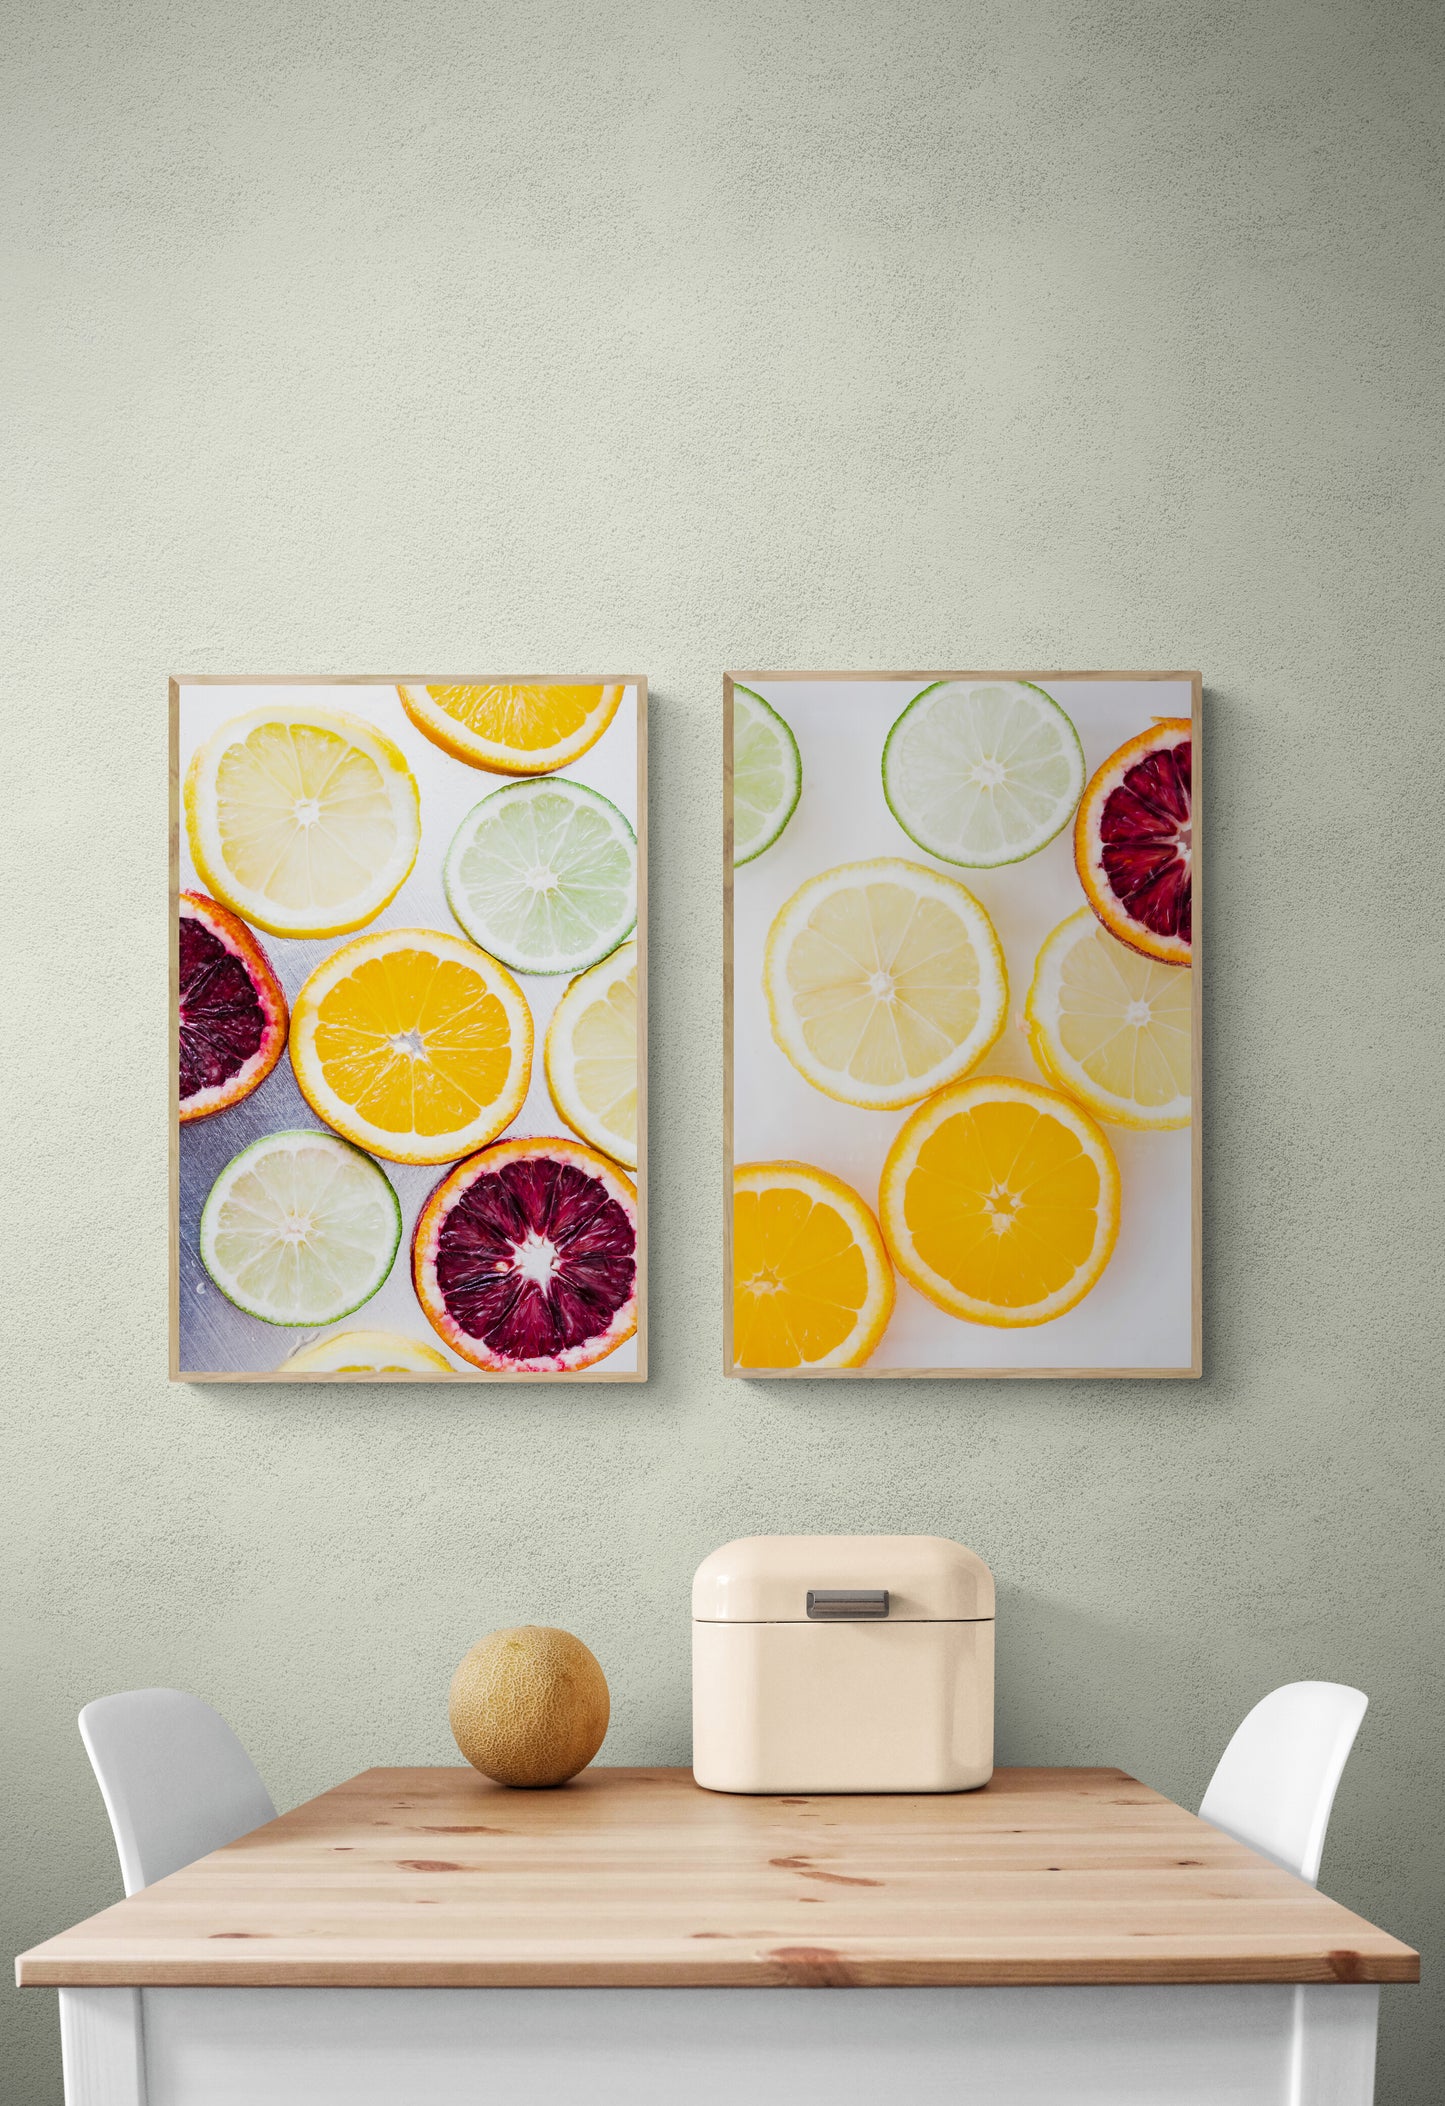 Set of two citrus prints in a kitchen